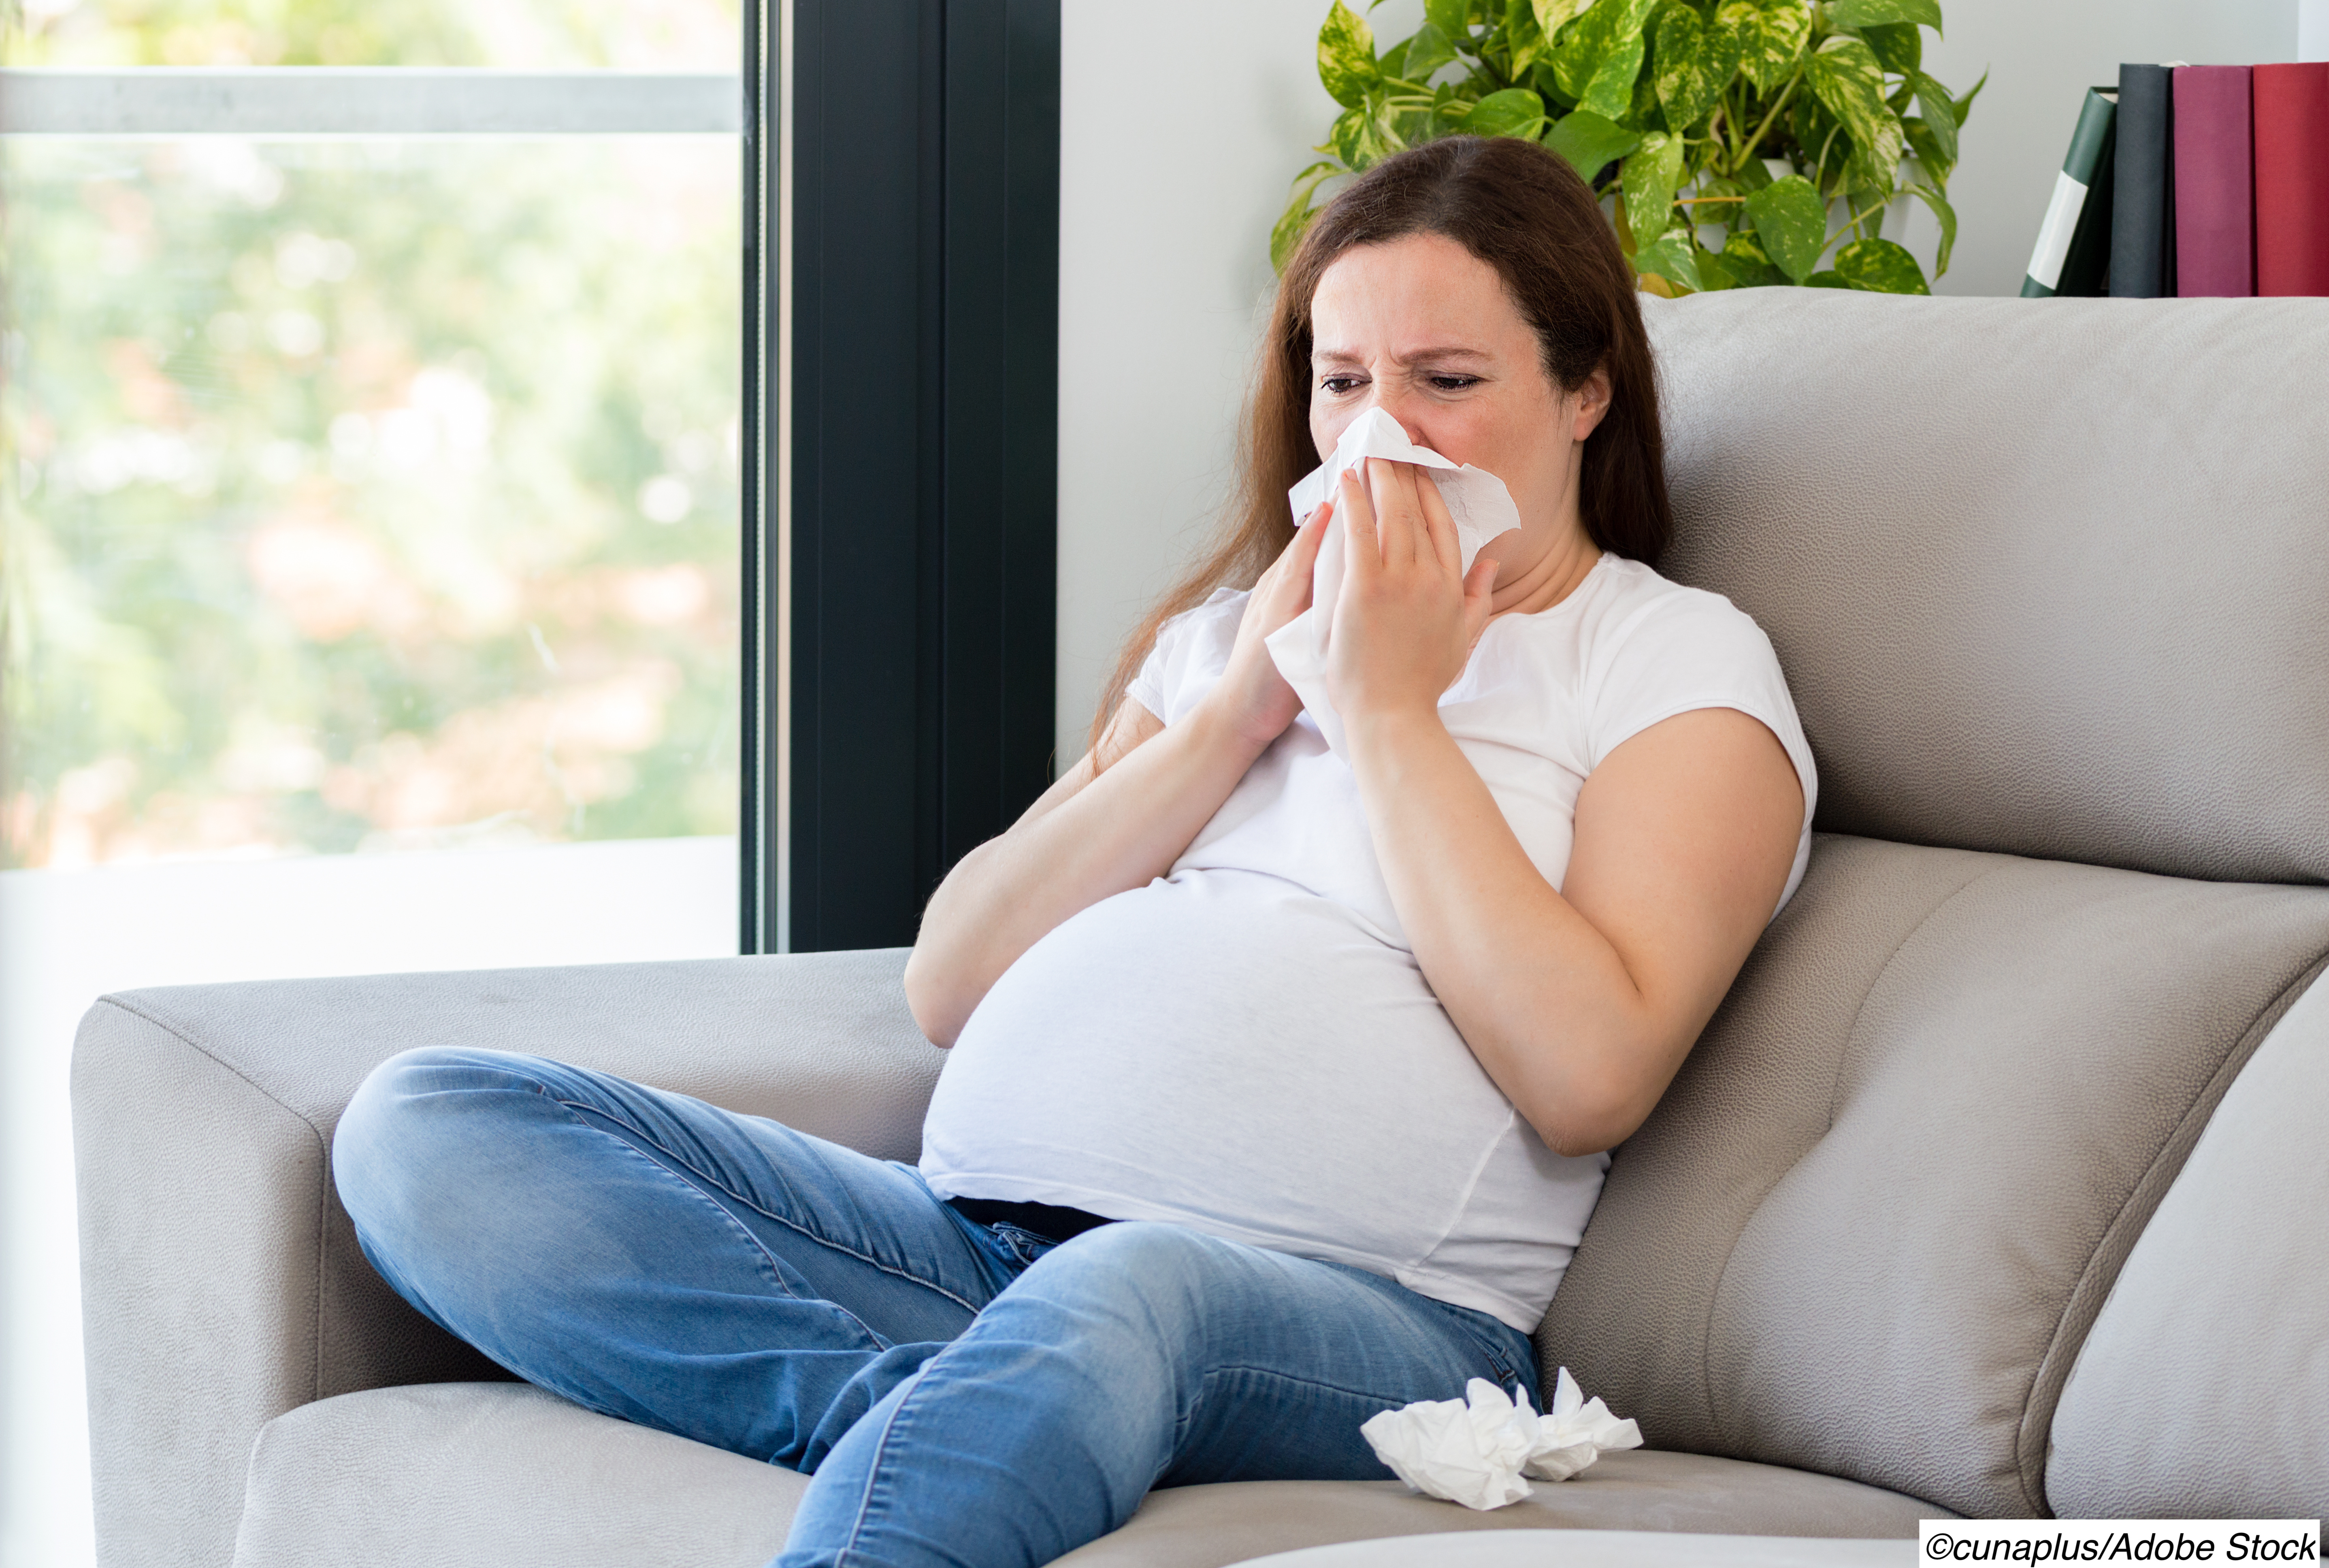 Fair Number of Pregnant Women Land in Hospital with the Flu